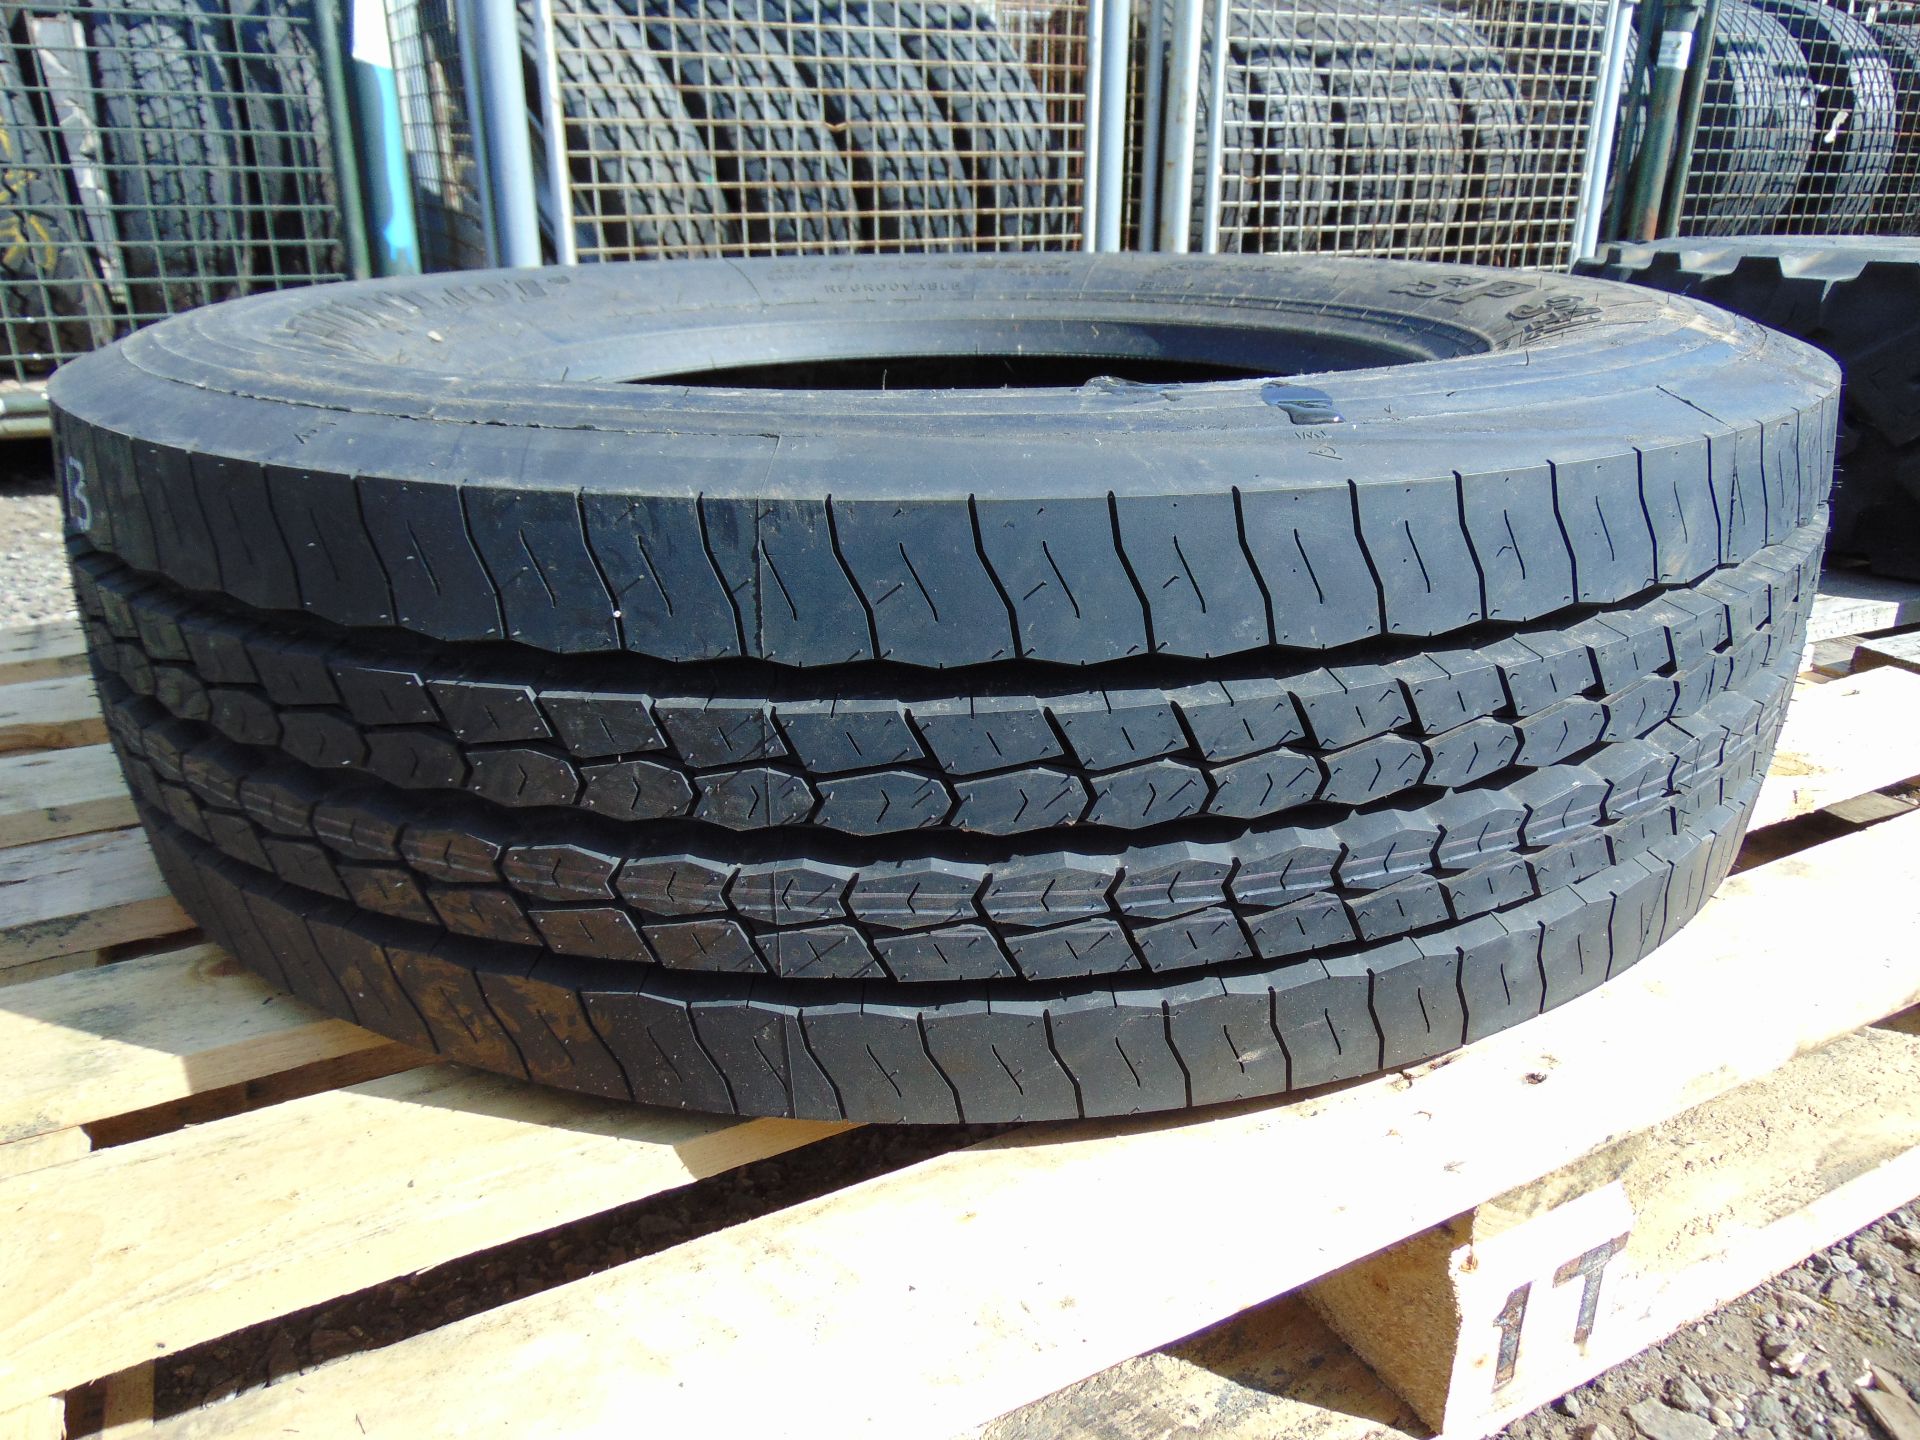 1 x Dunlop SP341 275/70 R22.5 Tyre - Image 2 of 6